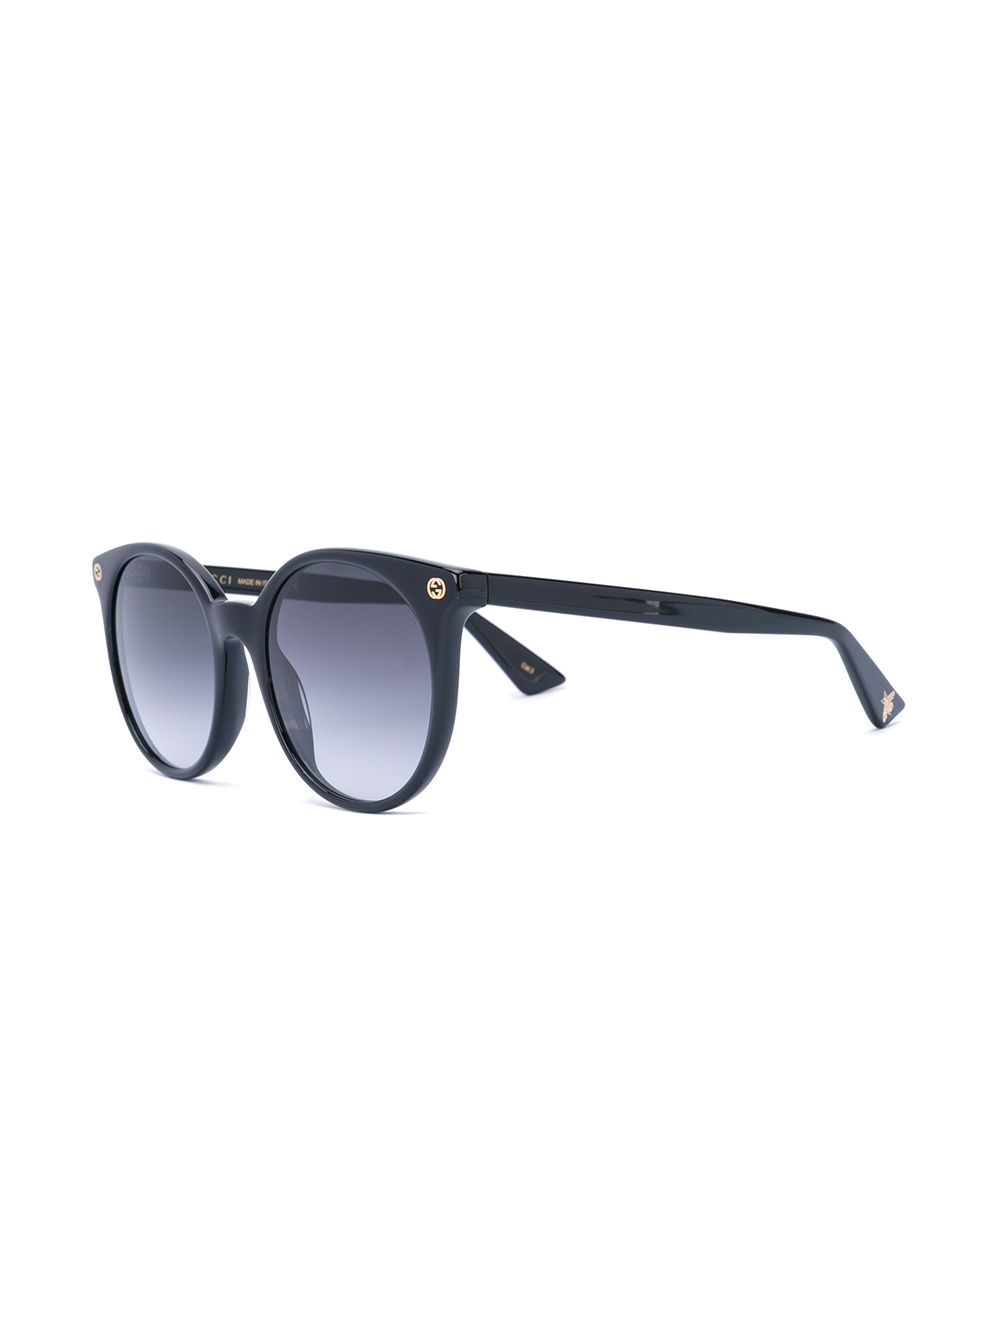 Shop Gucci Eyewear cat eye sunglasses with Express Delivery - FARFETCH